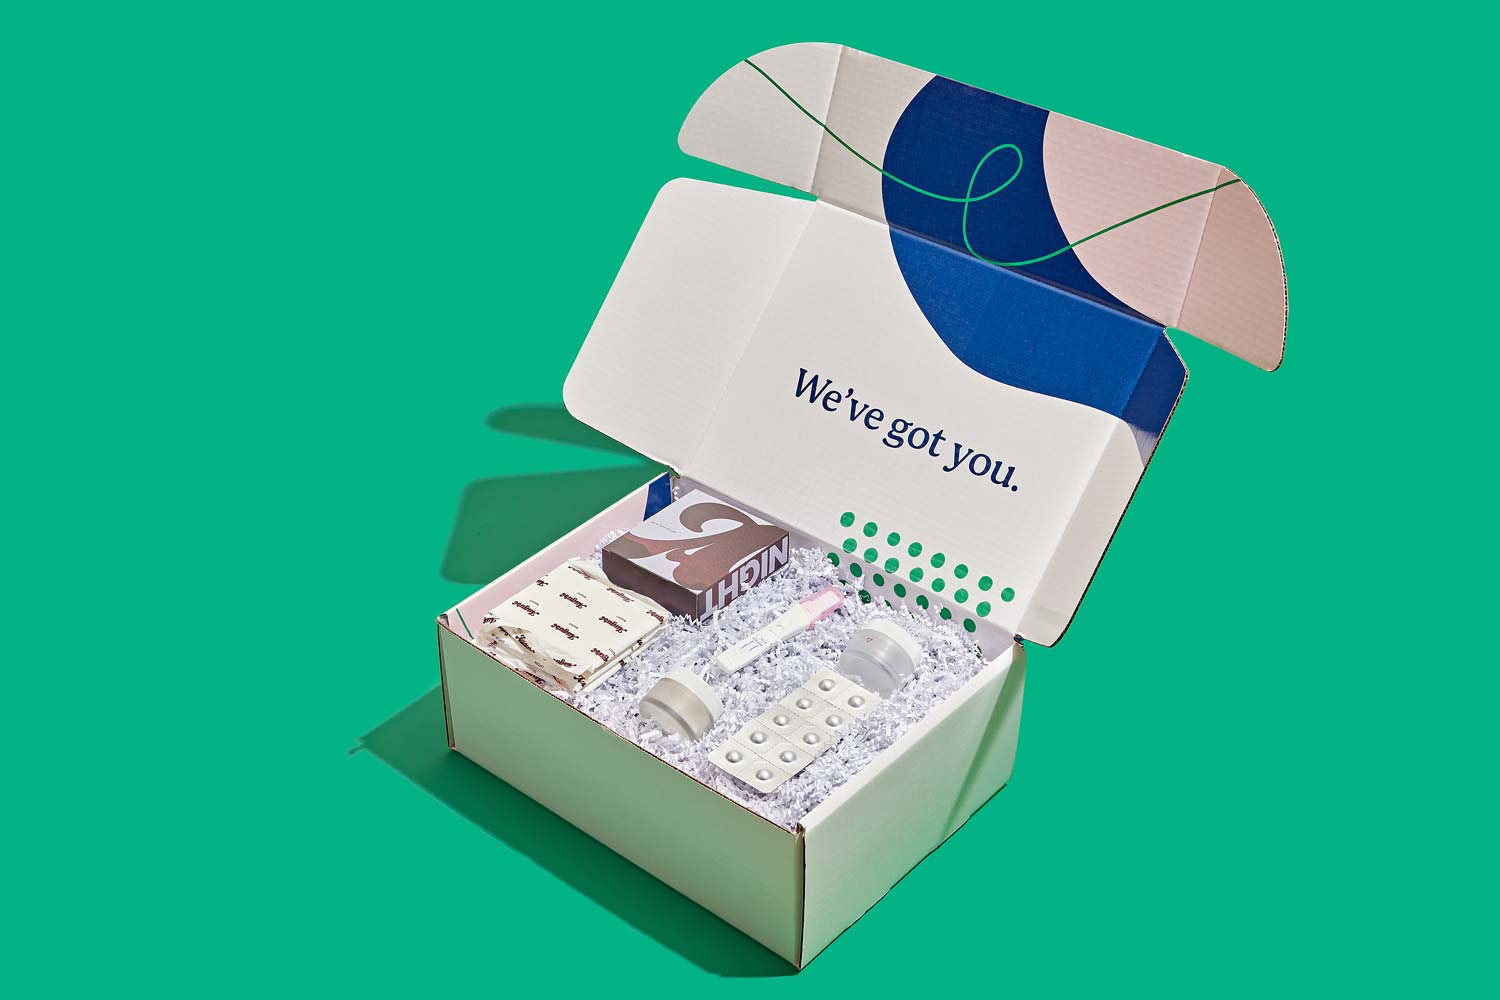 An open Wisp shipping box on a green surface with a medication abortion kit inside